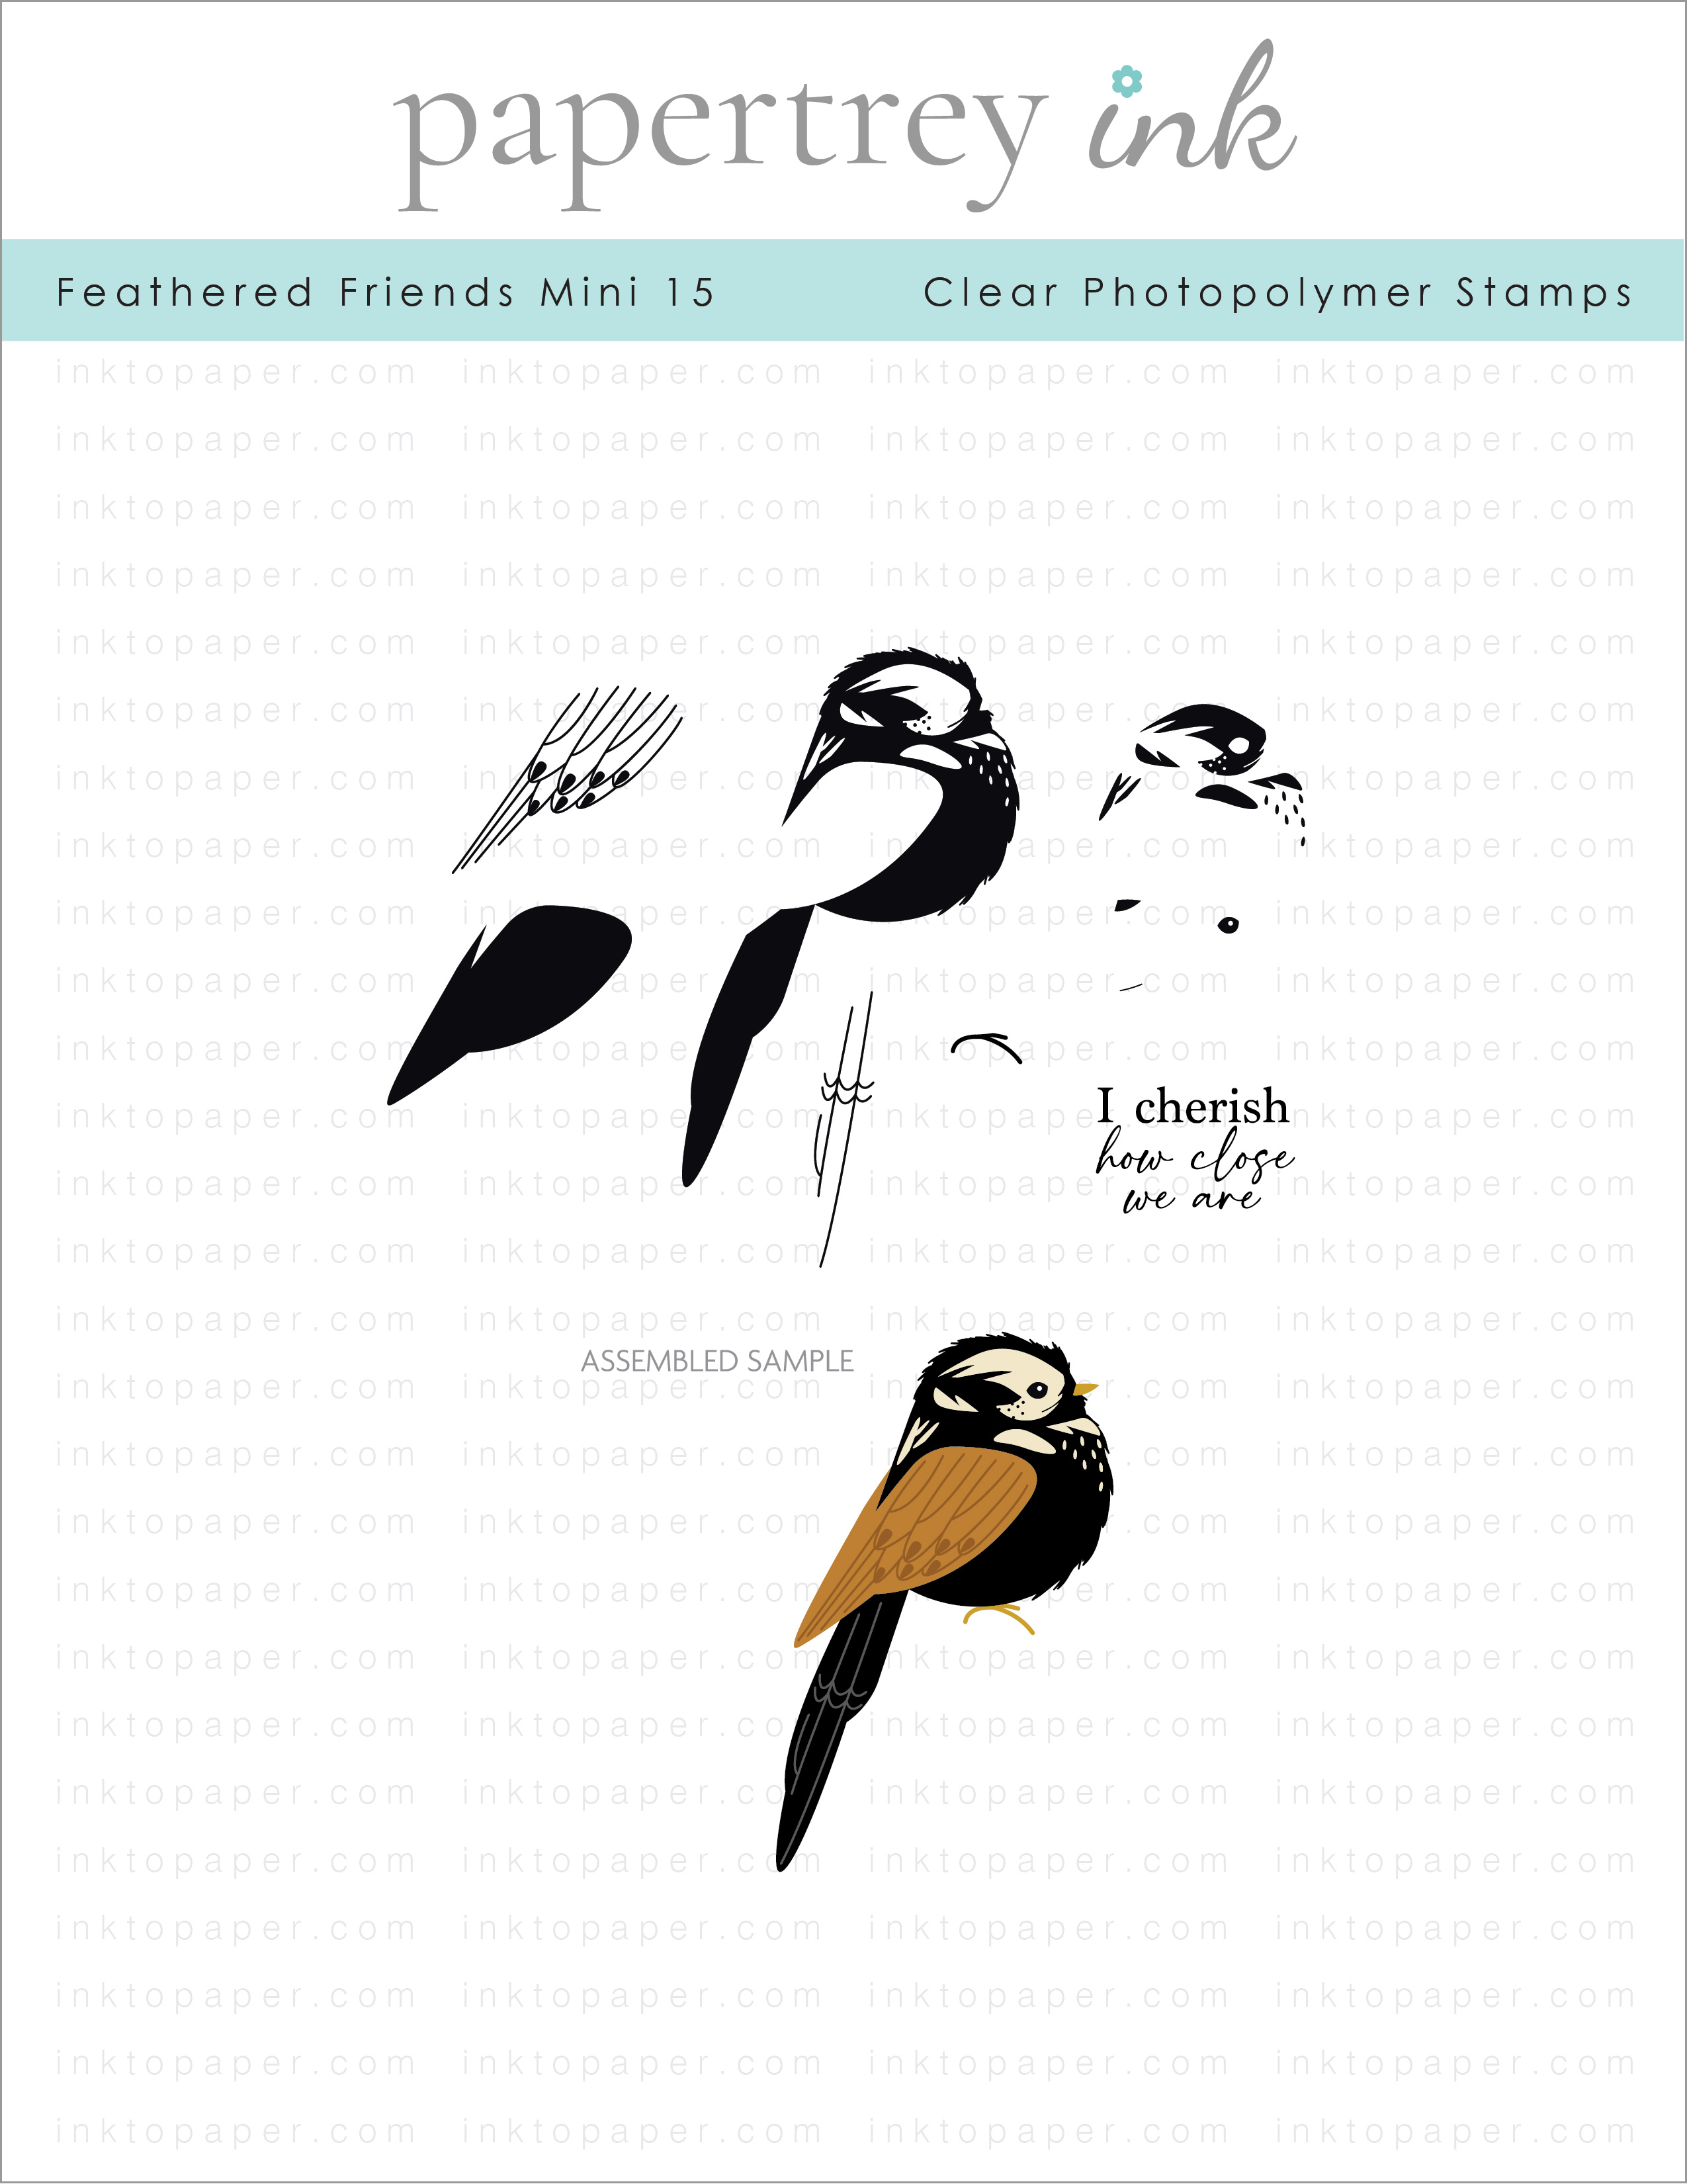 Feathered Friends Mini 15 Mini Stamp Set: Papertrey Ink